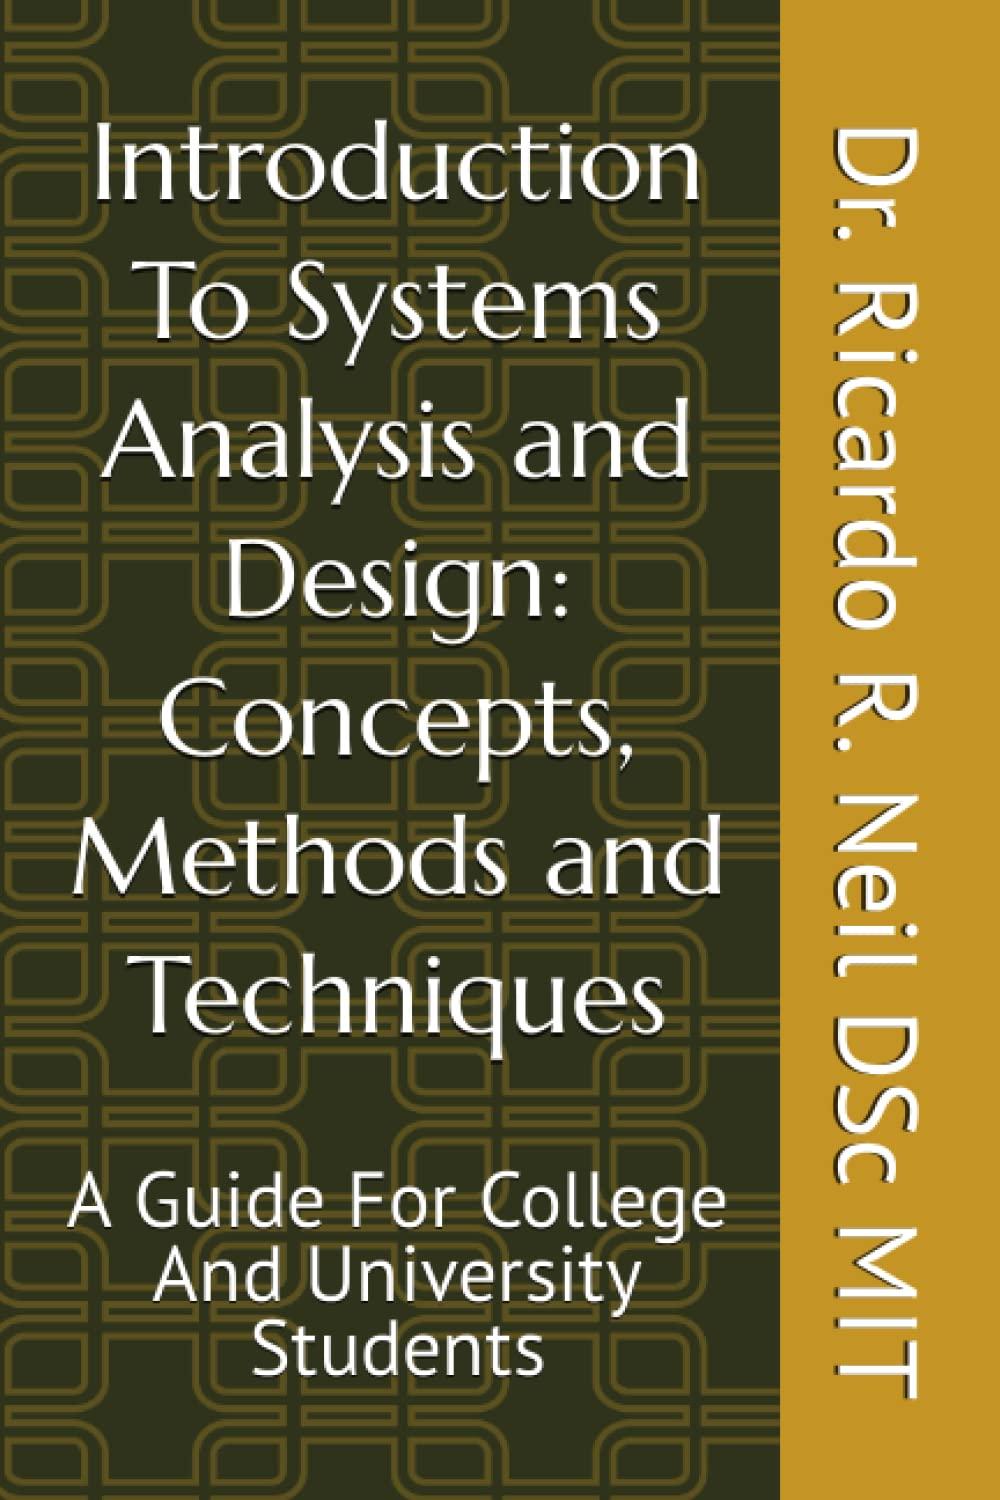 introduction to systems analysis and design concepts methods and techniques a guide for college and